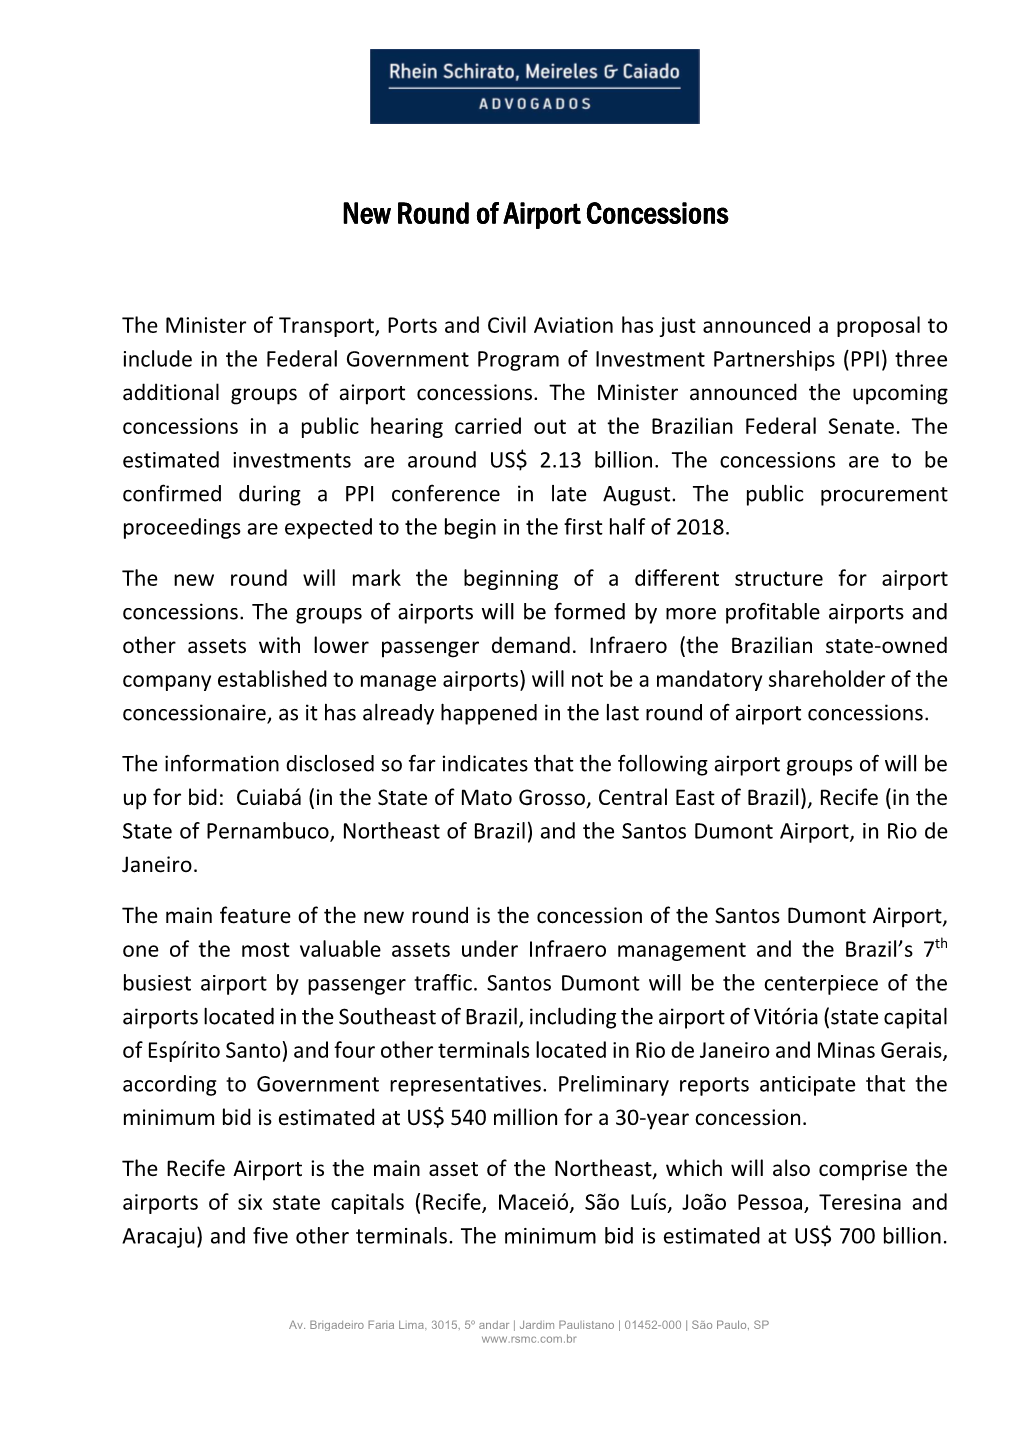 170814 CCLR JCB New Round of Airport Concessions in Brazil